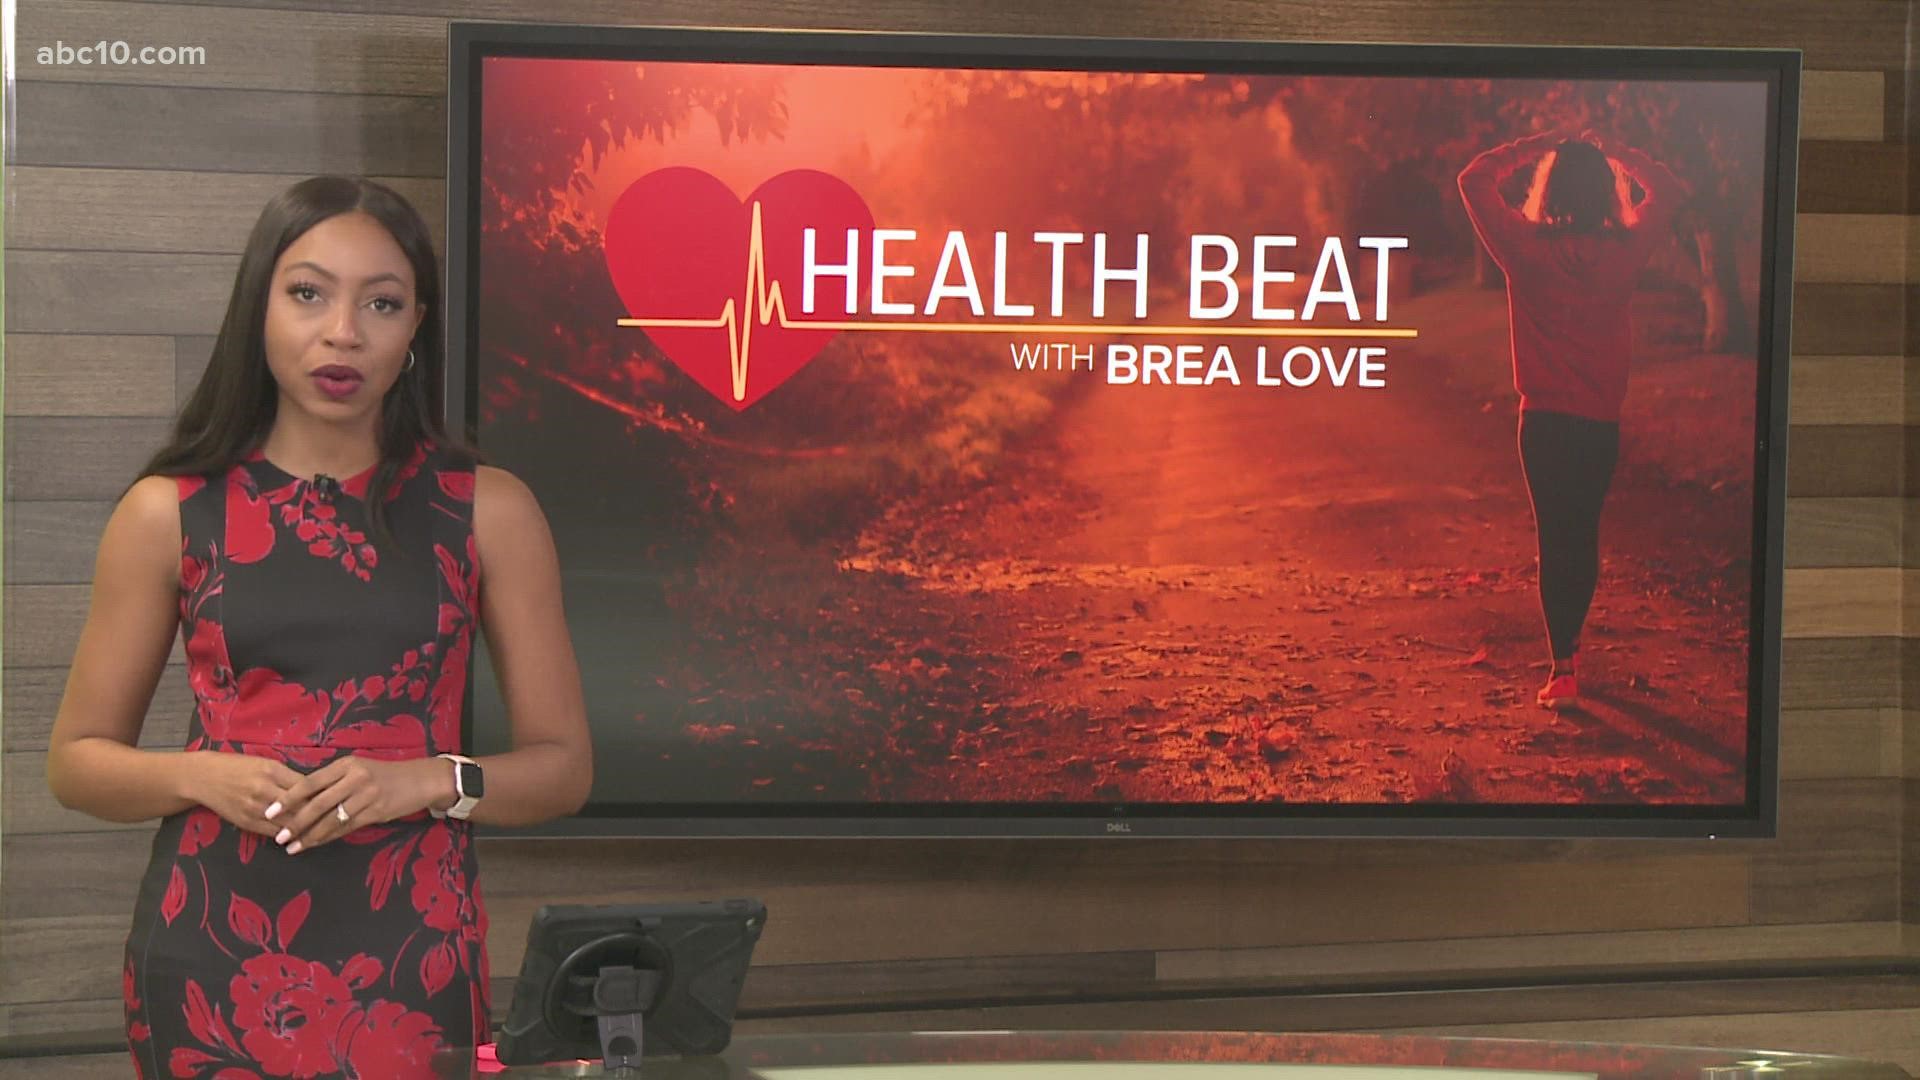 ABC10's Brea Love is back with another Health Beat, this time answering the question why young children are more likely to spread COVID.